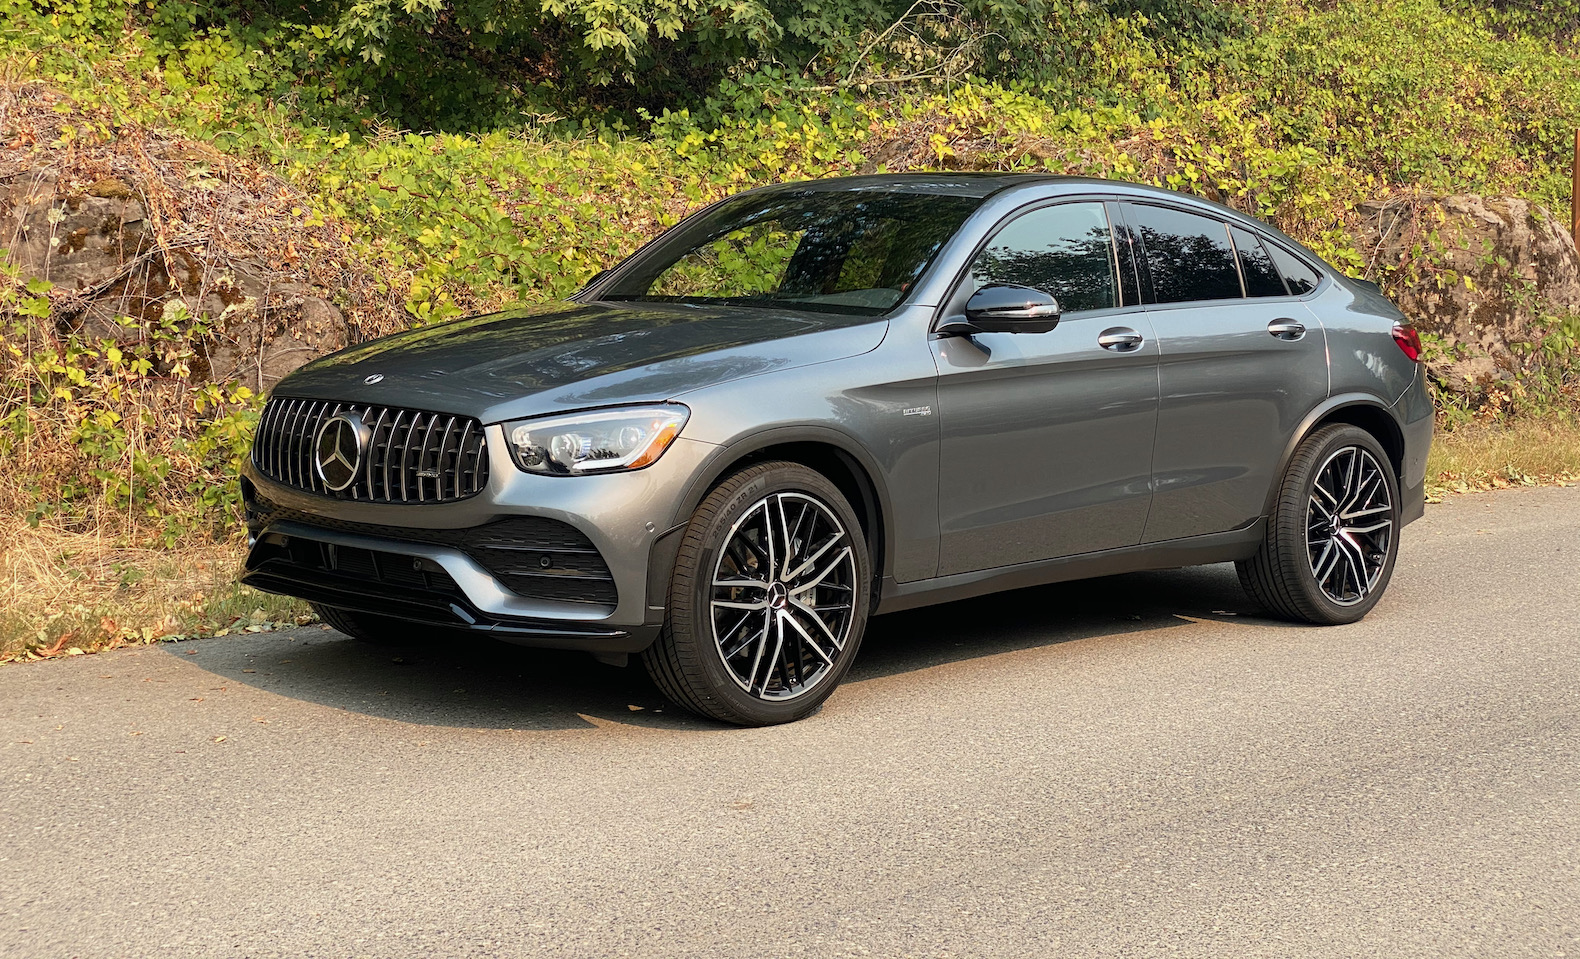 2020 Mercedes-AMG GLC 43 Coupe Review: The perfect balance - The Torque  Report